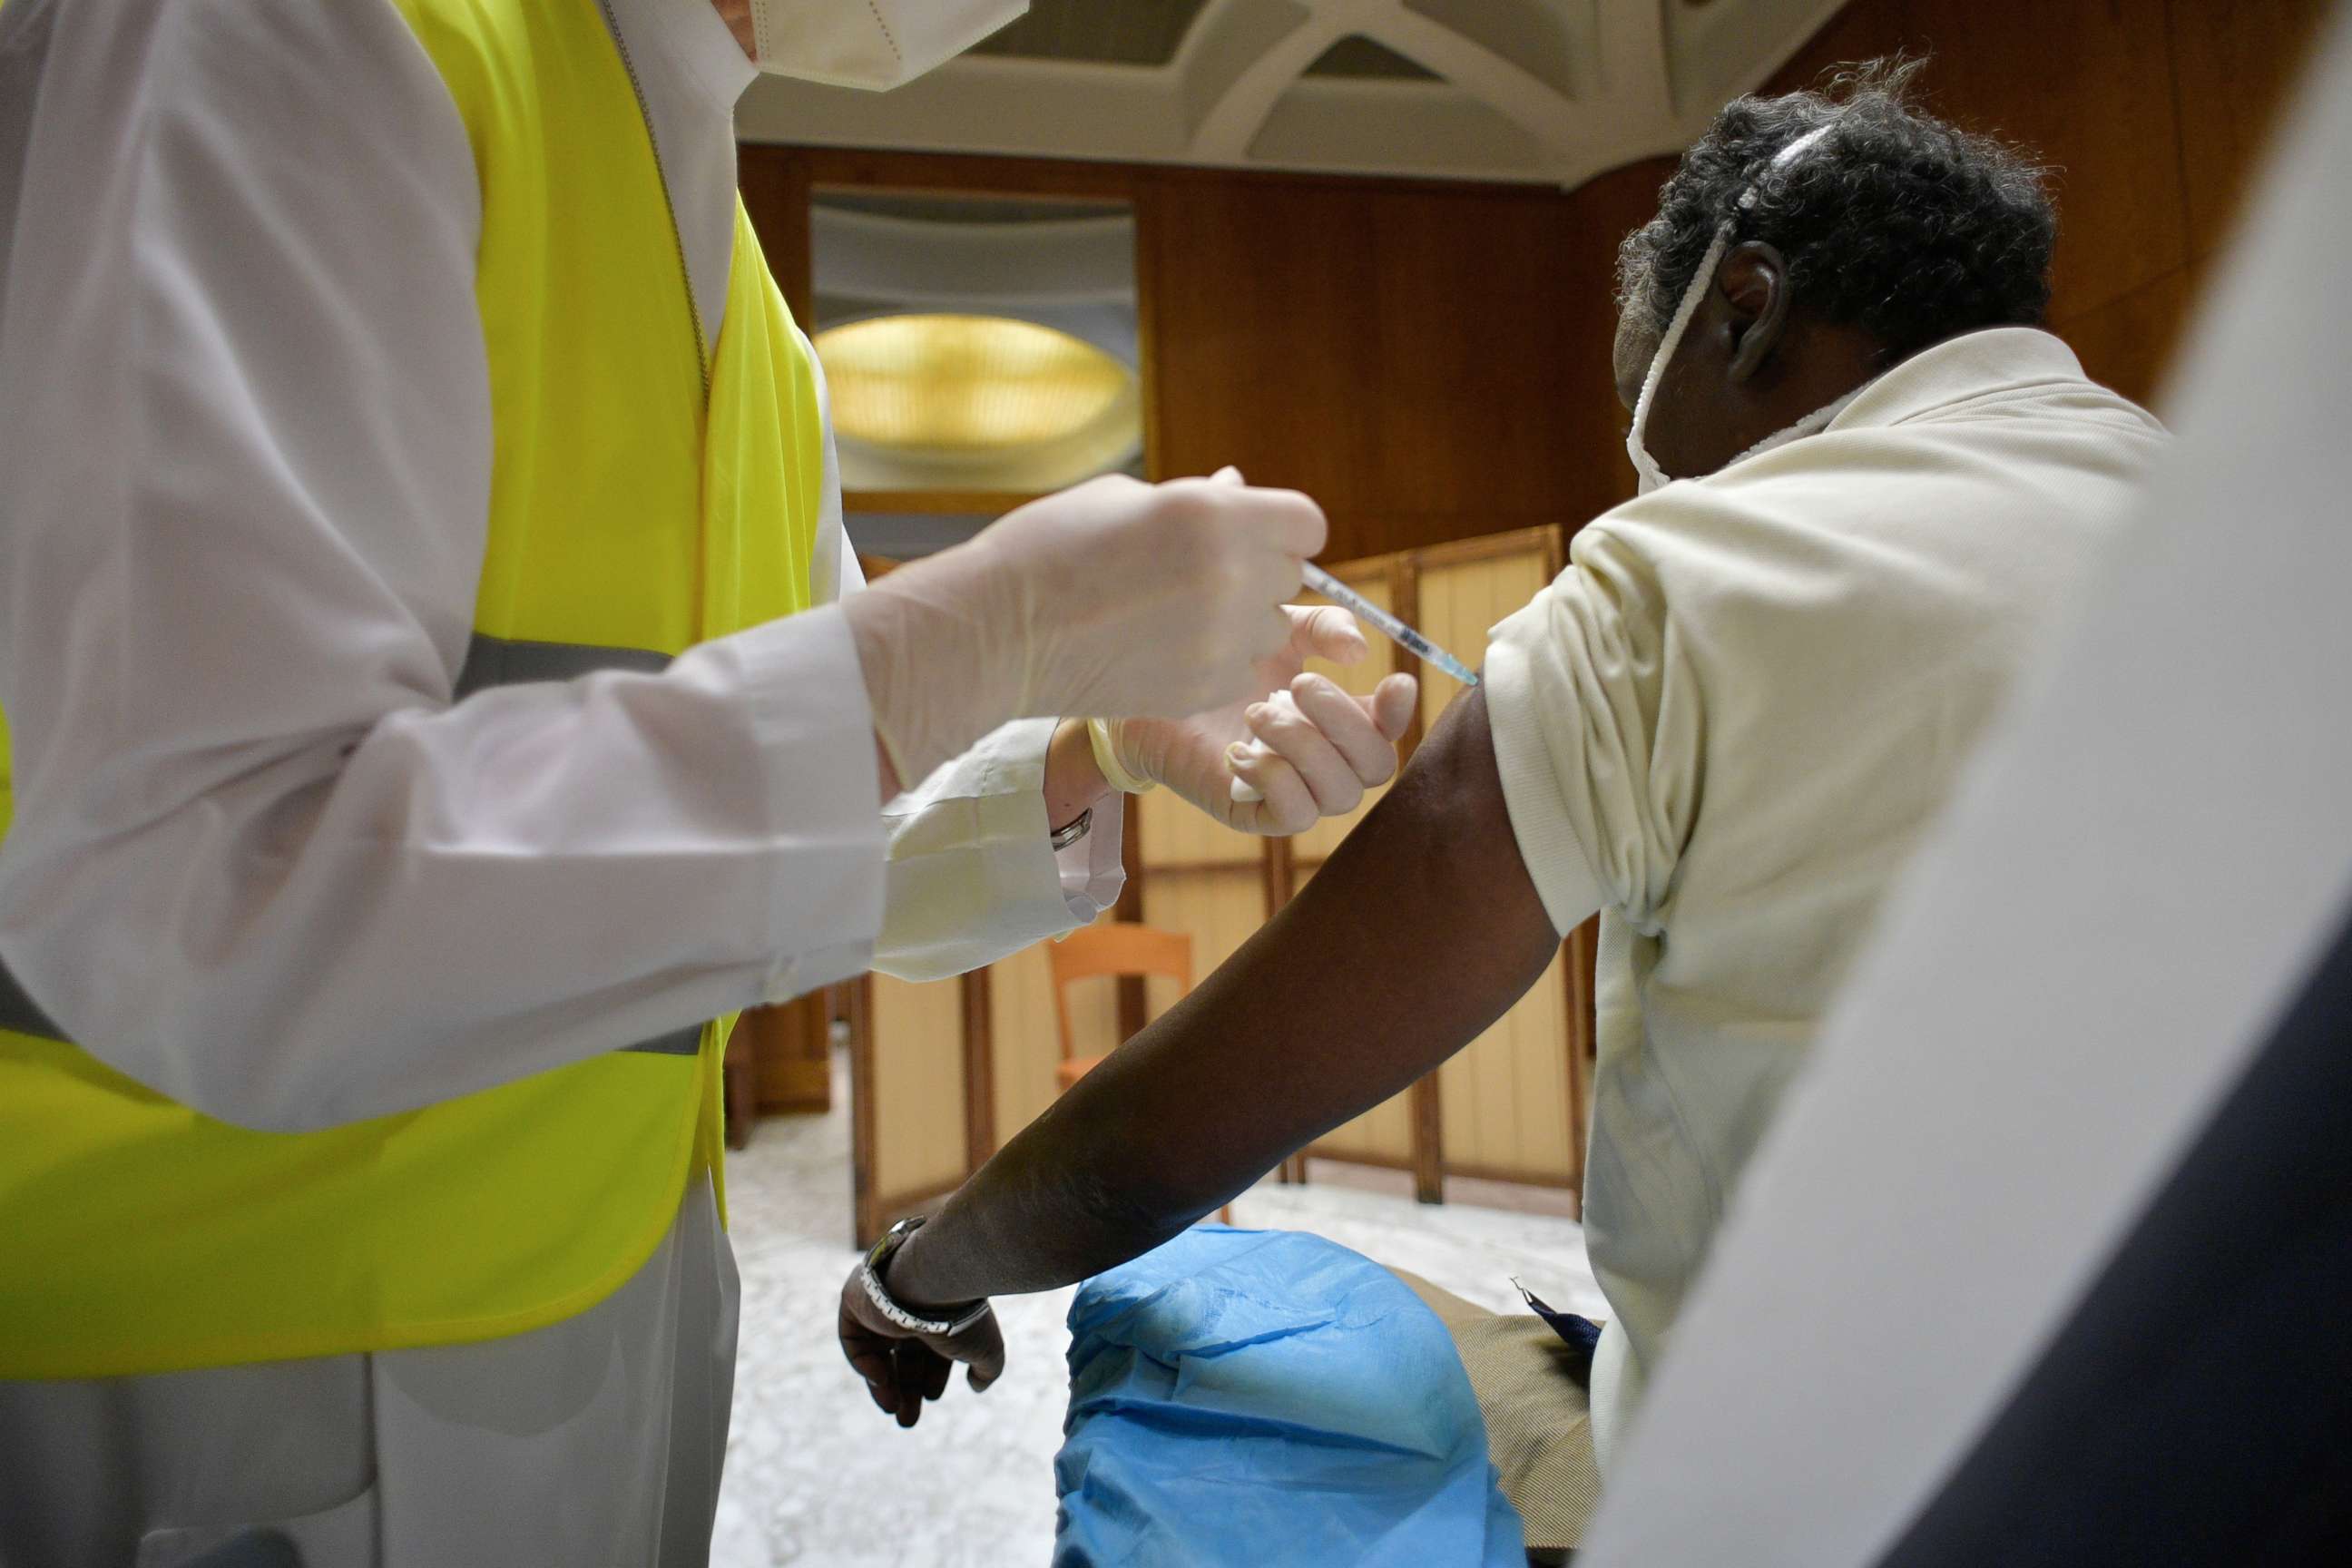 PHOTO: A person receives a dose of a vaccine against the coronavirus disease (COVID-19), at Paul VI Hall in the Vatican, March 31, 2021.